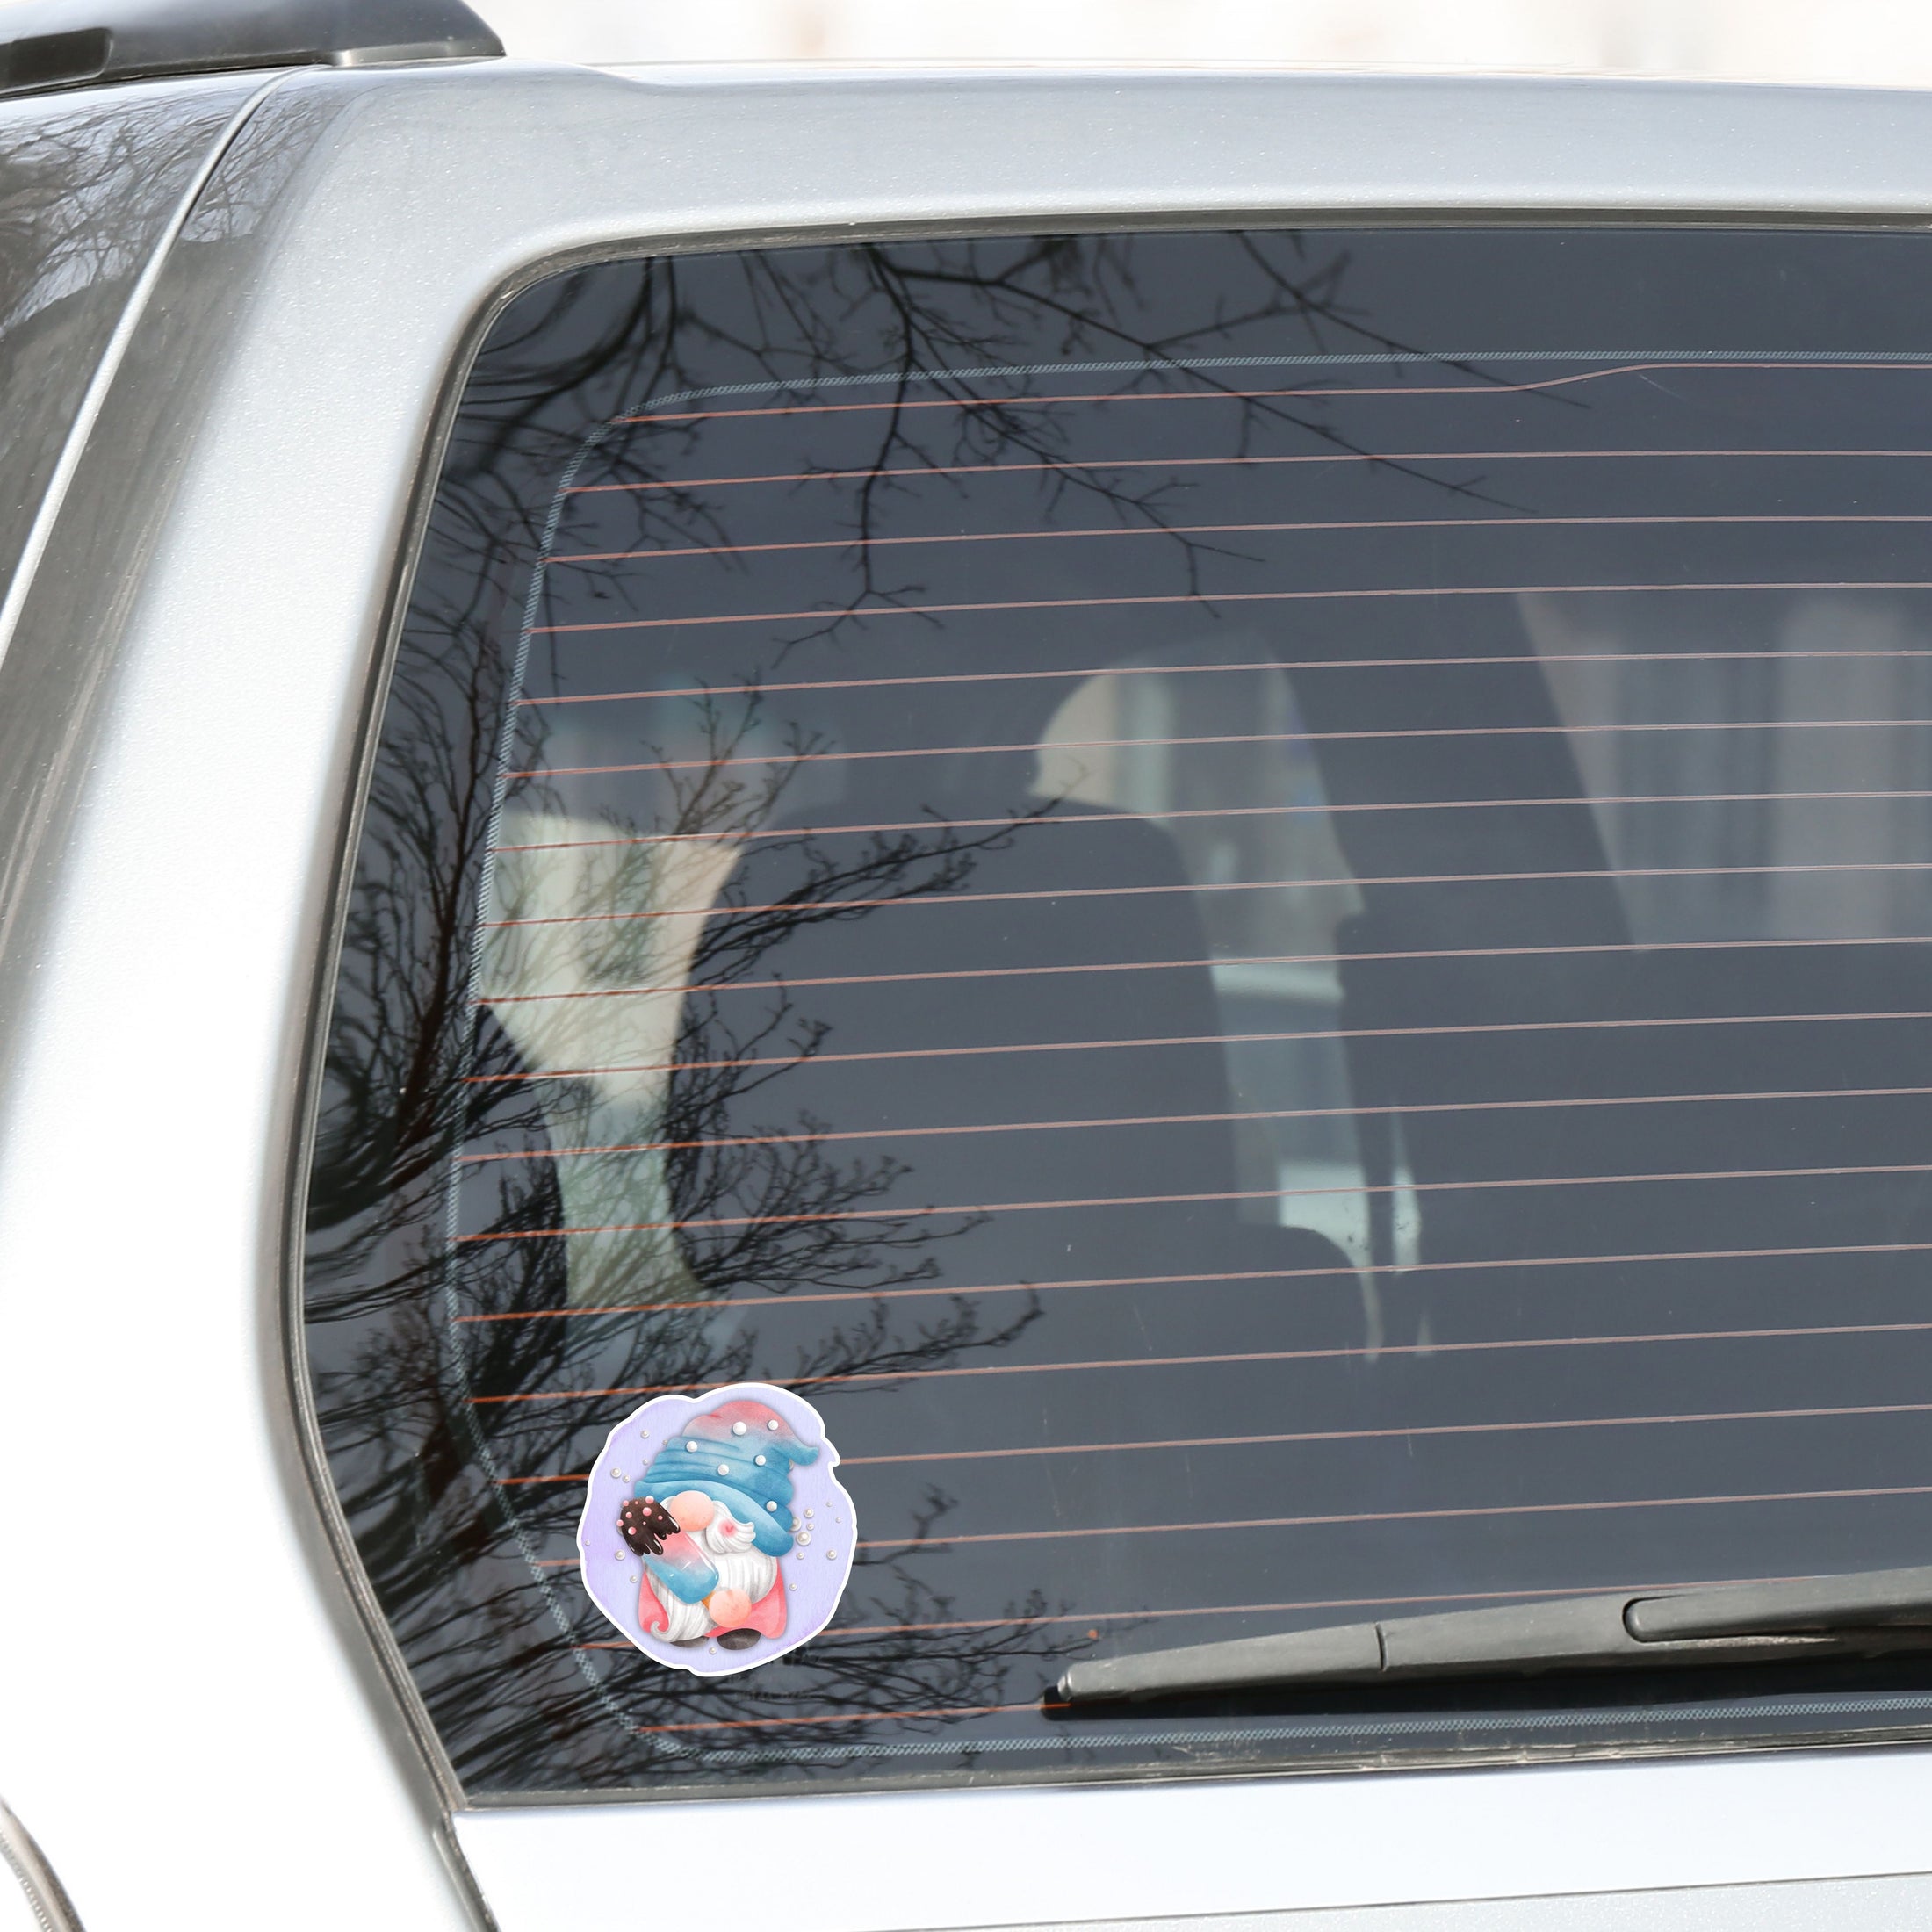 This image shows the gnome with a popsicle on the back window of a car.